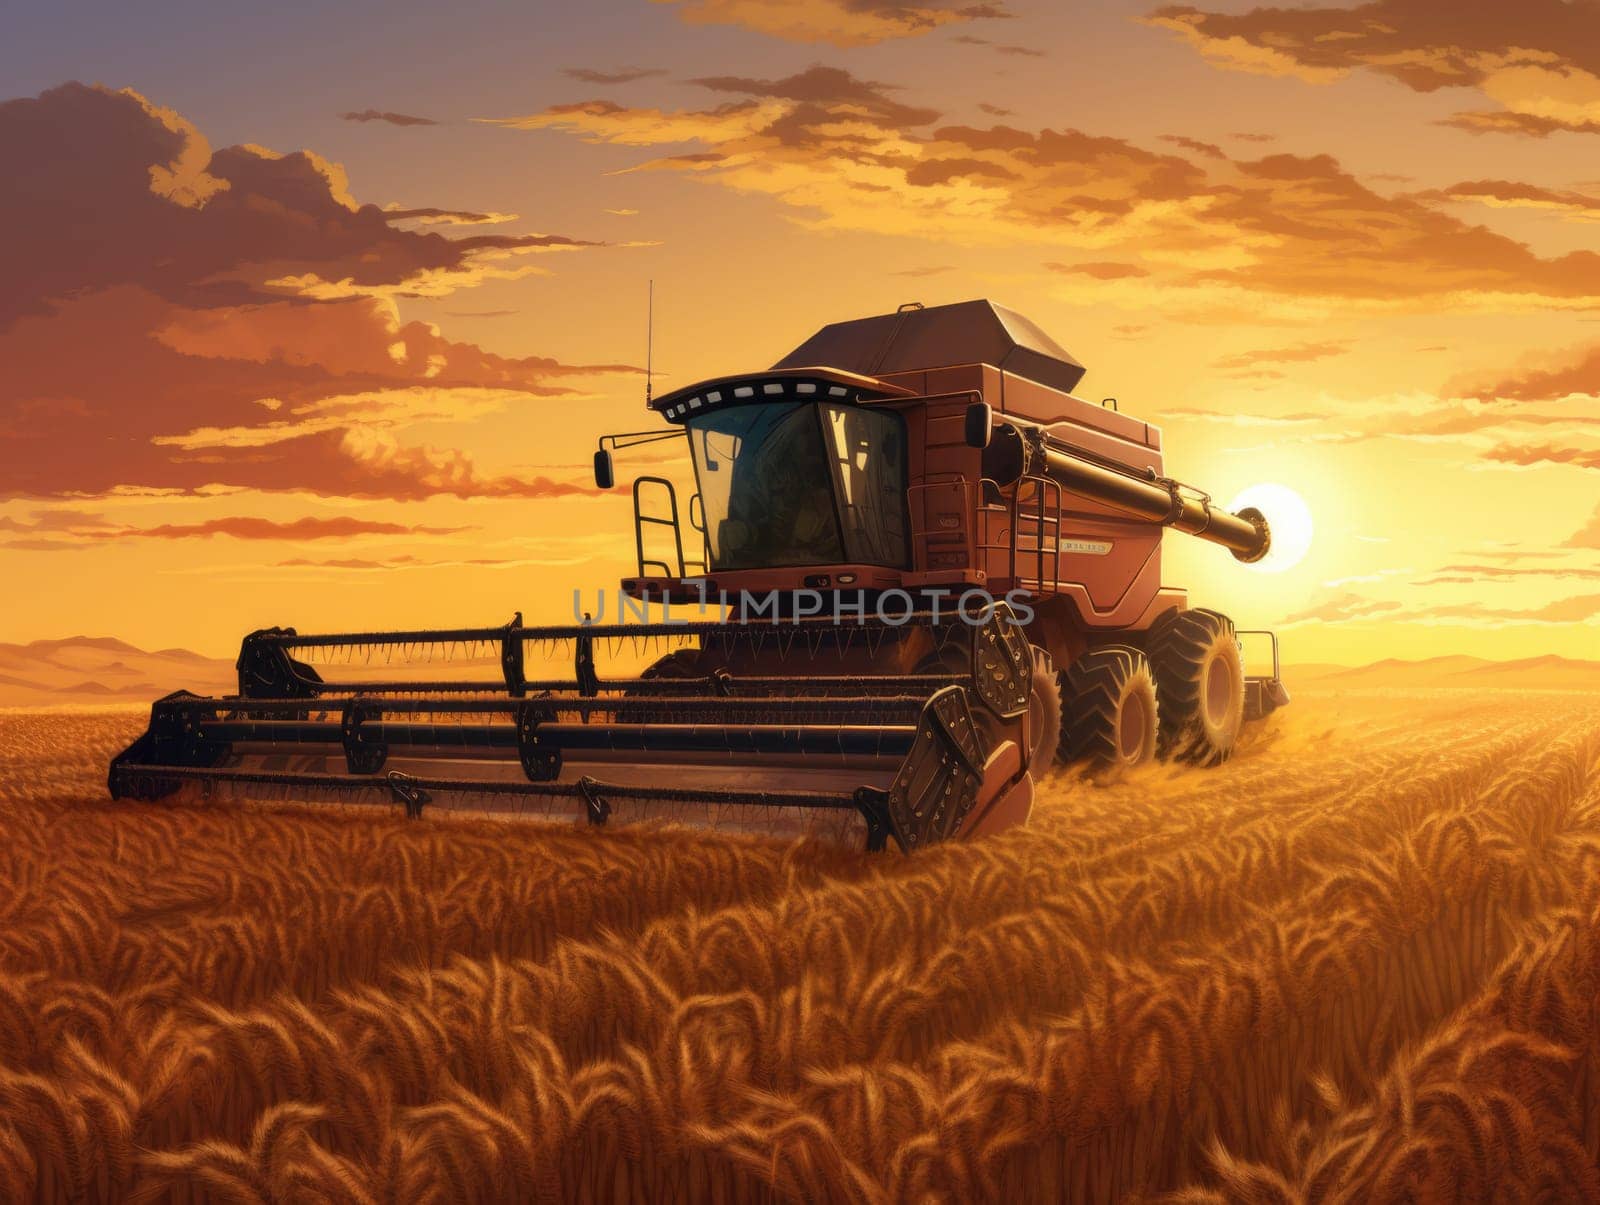 A scene showcasing a combine harvester, a large red tractor, actively harvesting wheat in a field.